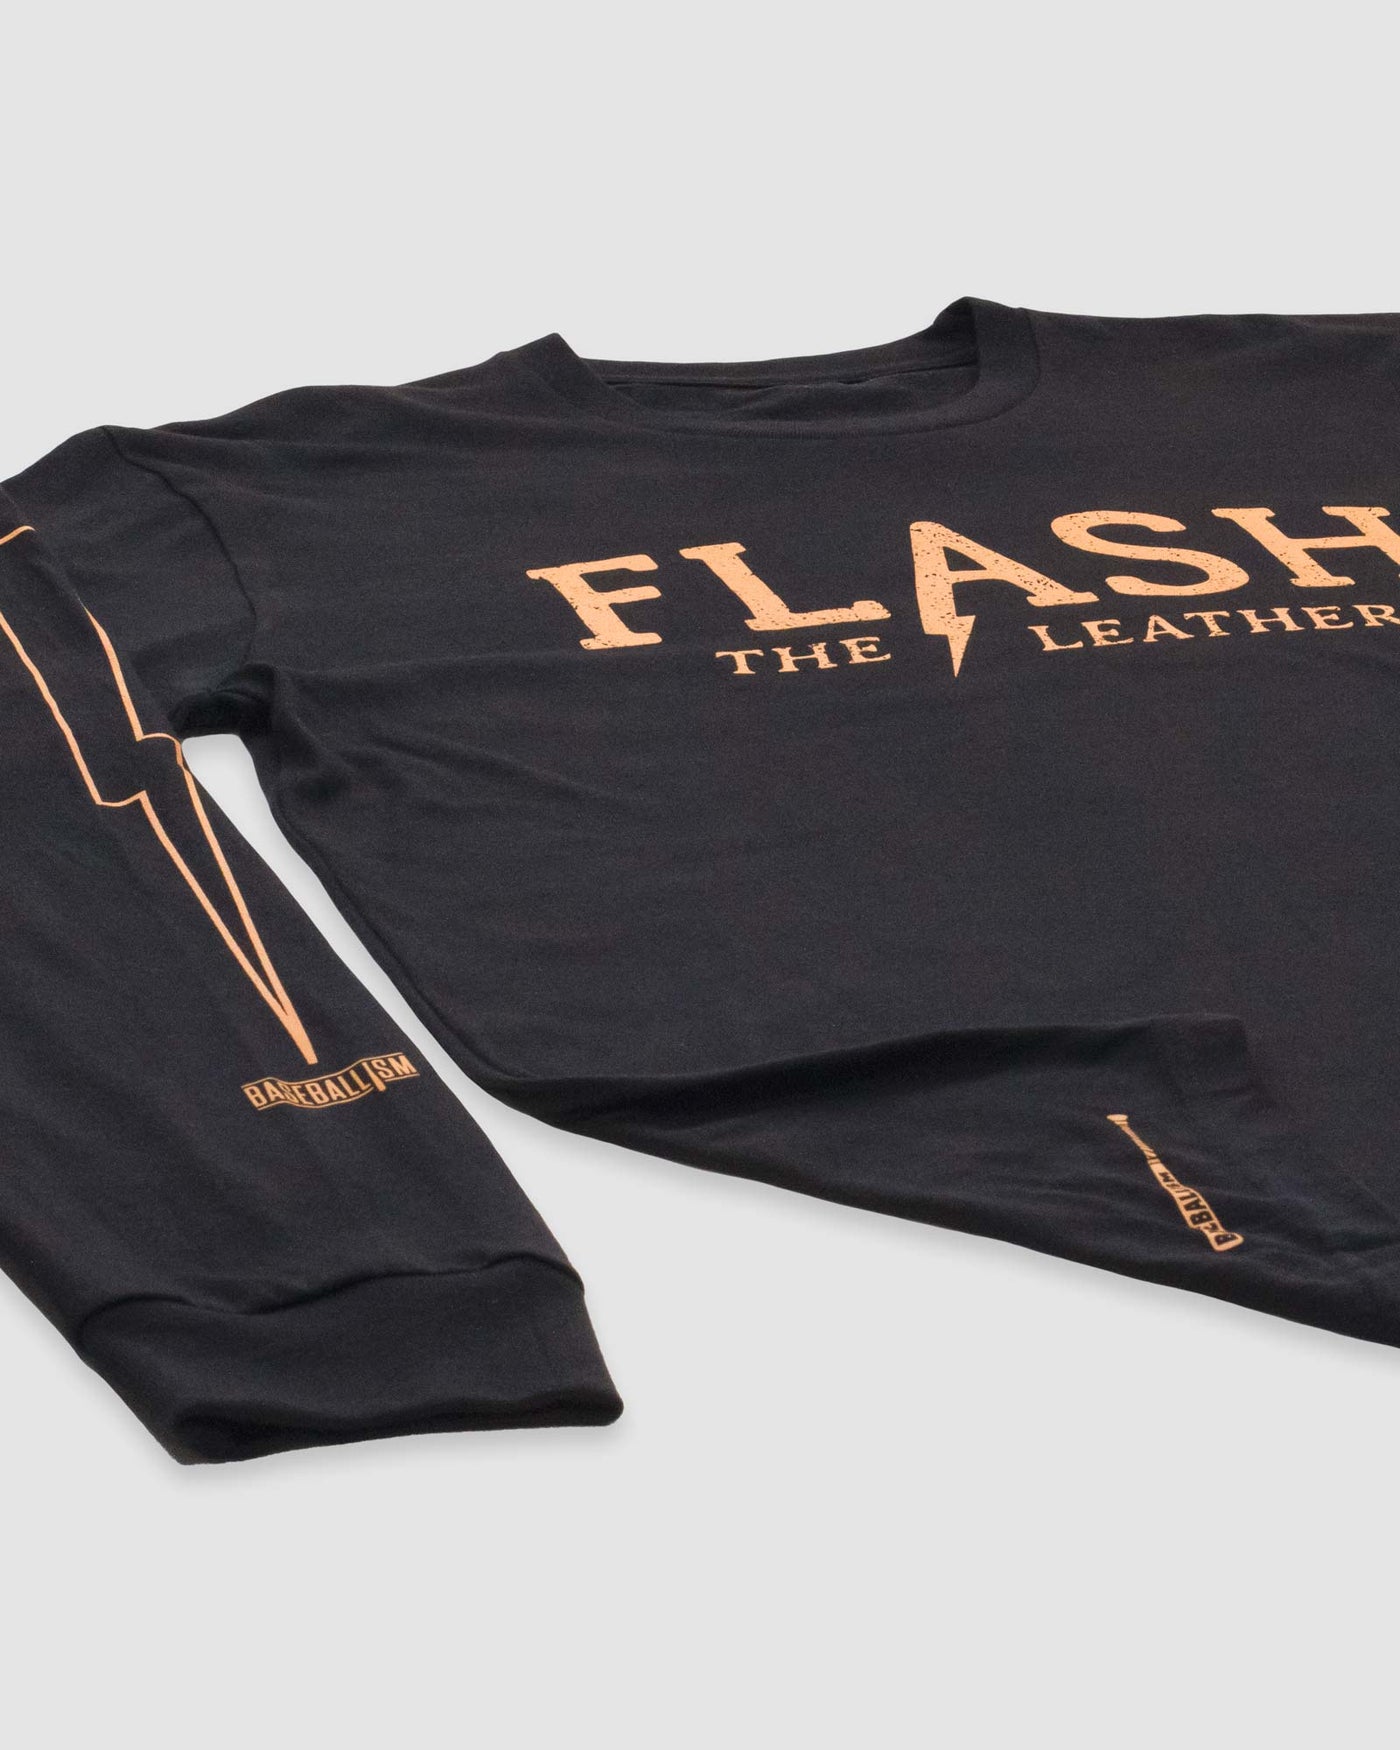 Battery Bundle - Flash the Leather (Lefty): Snapback and Tee